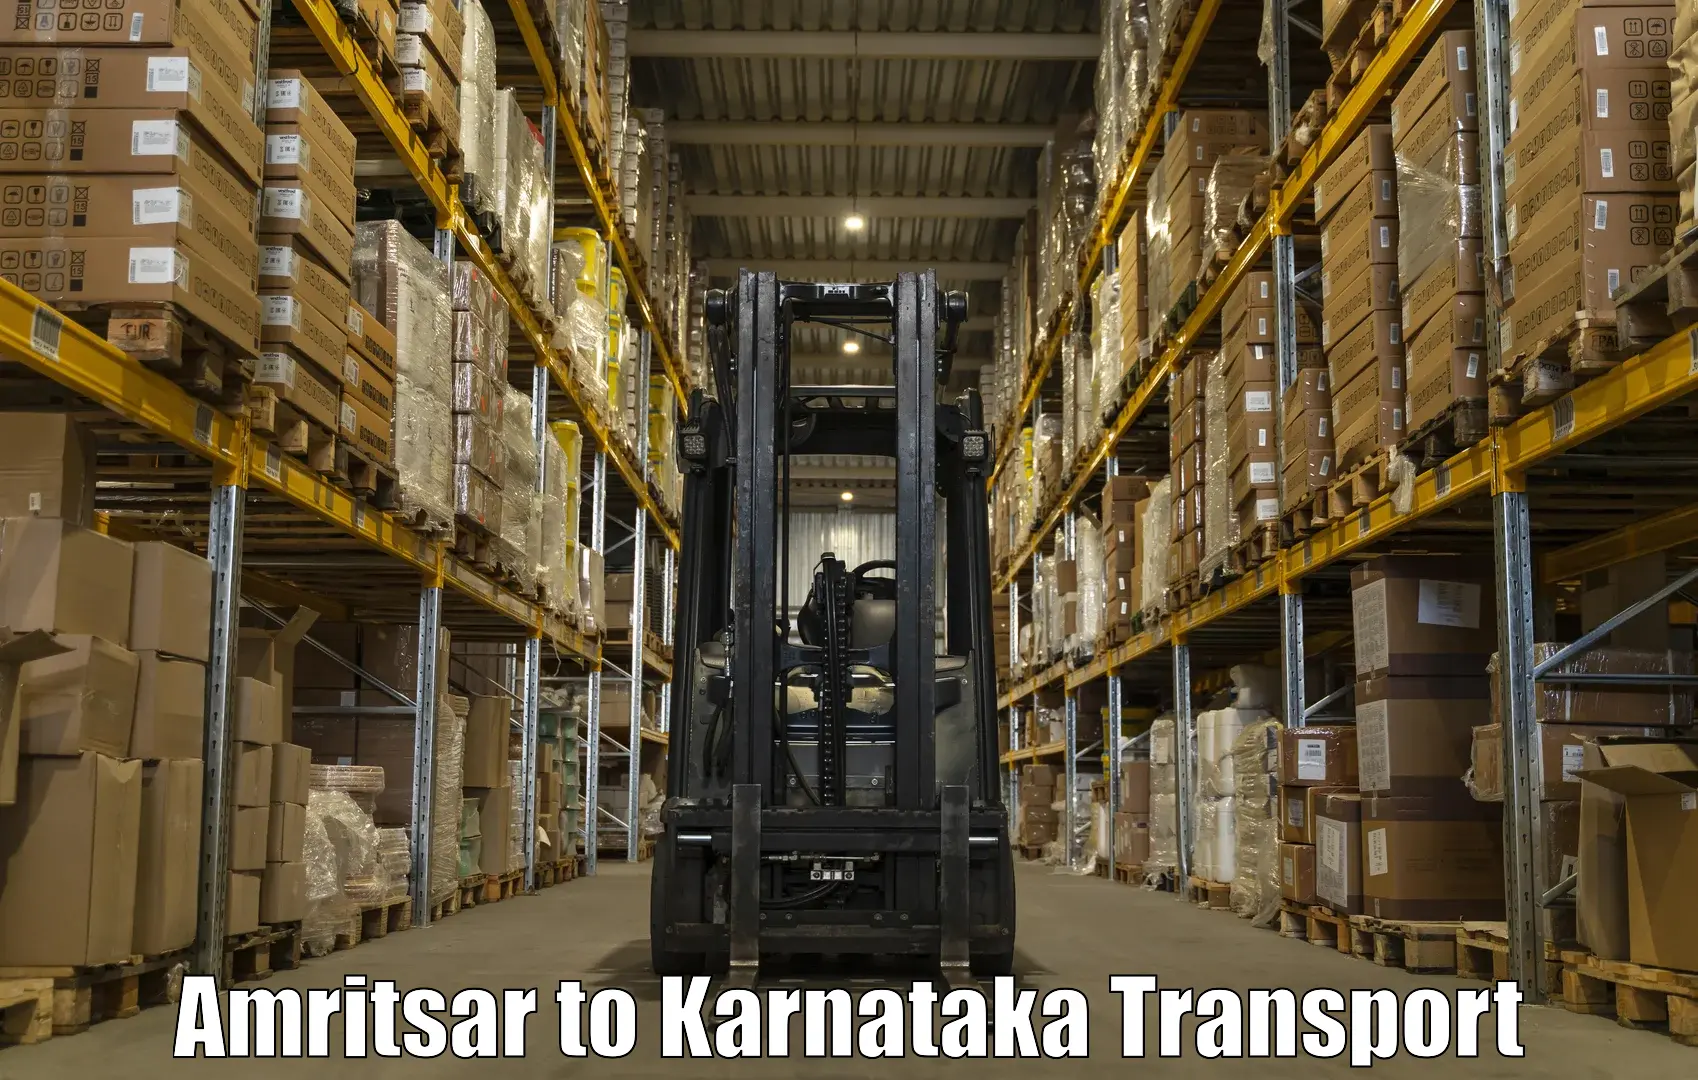 Express transport services in Amritsar to Bangalore